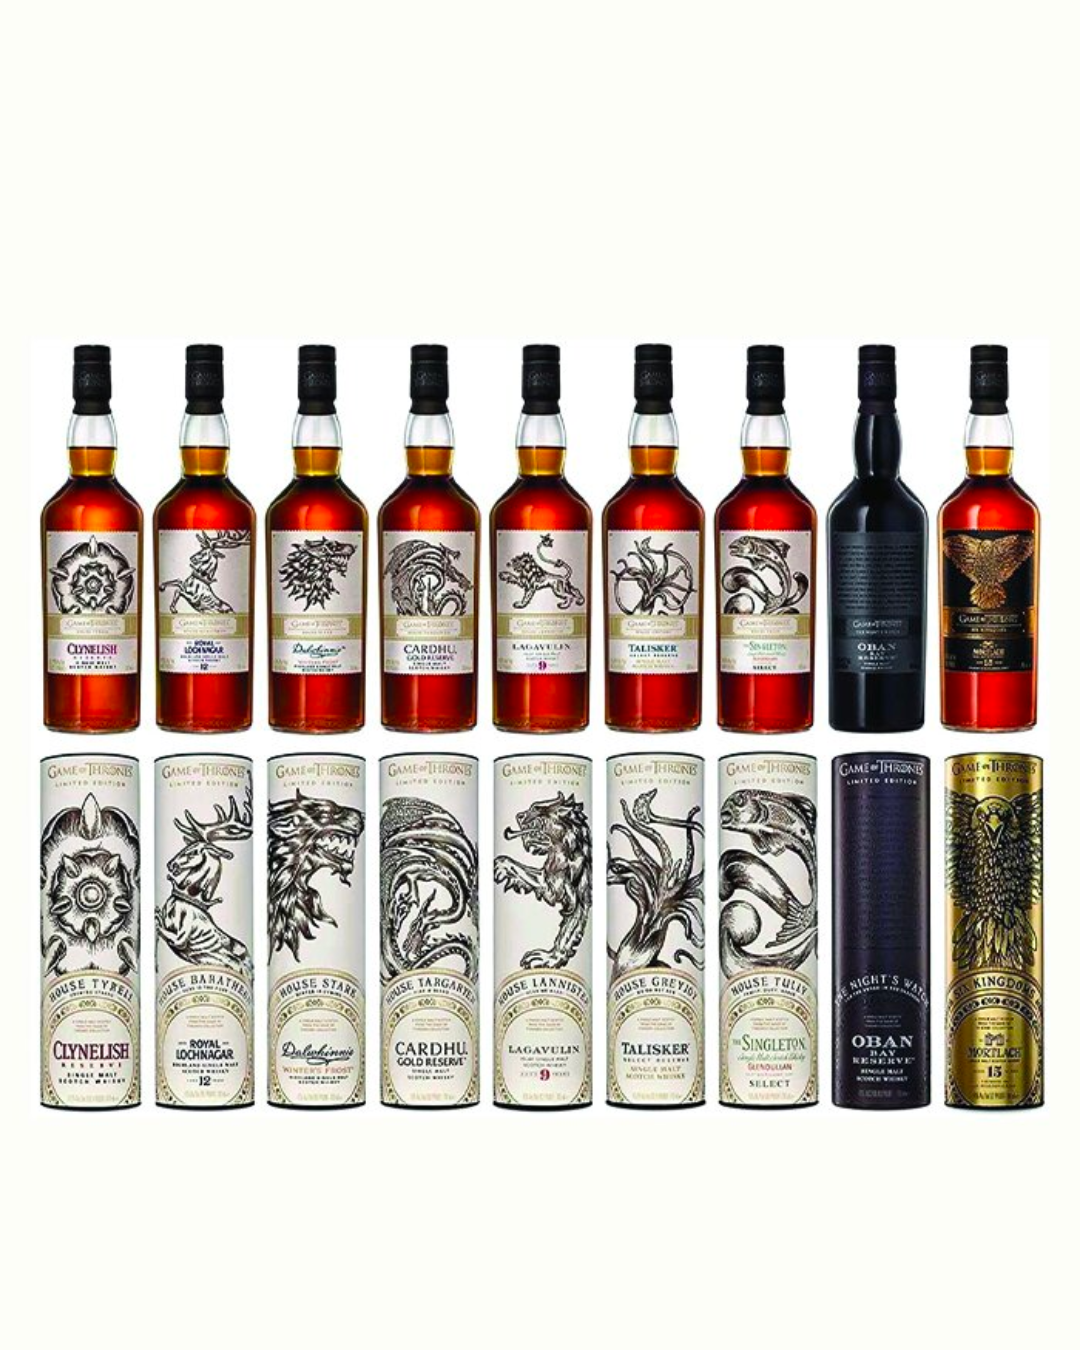 Game of Thrones Collection - 9 bottle set